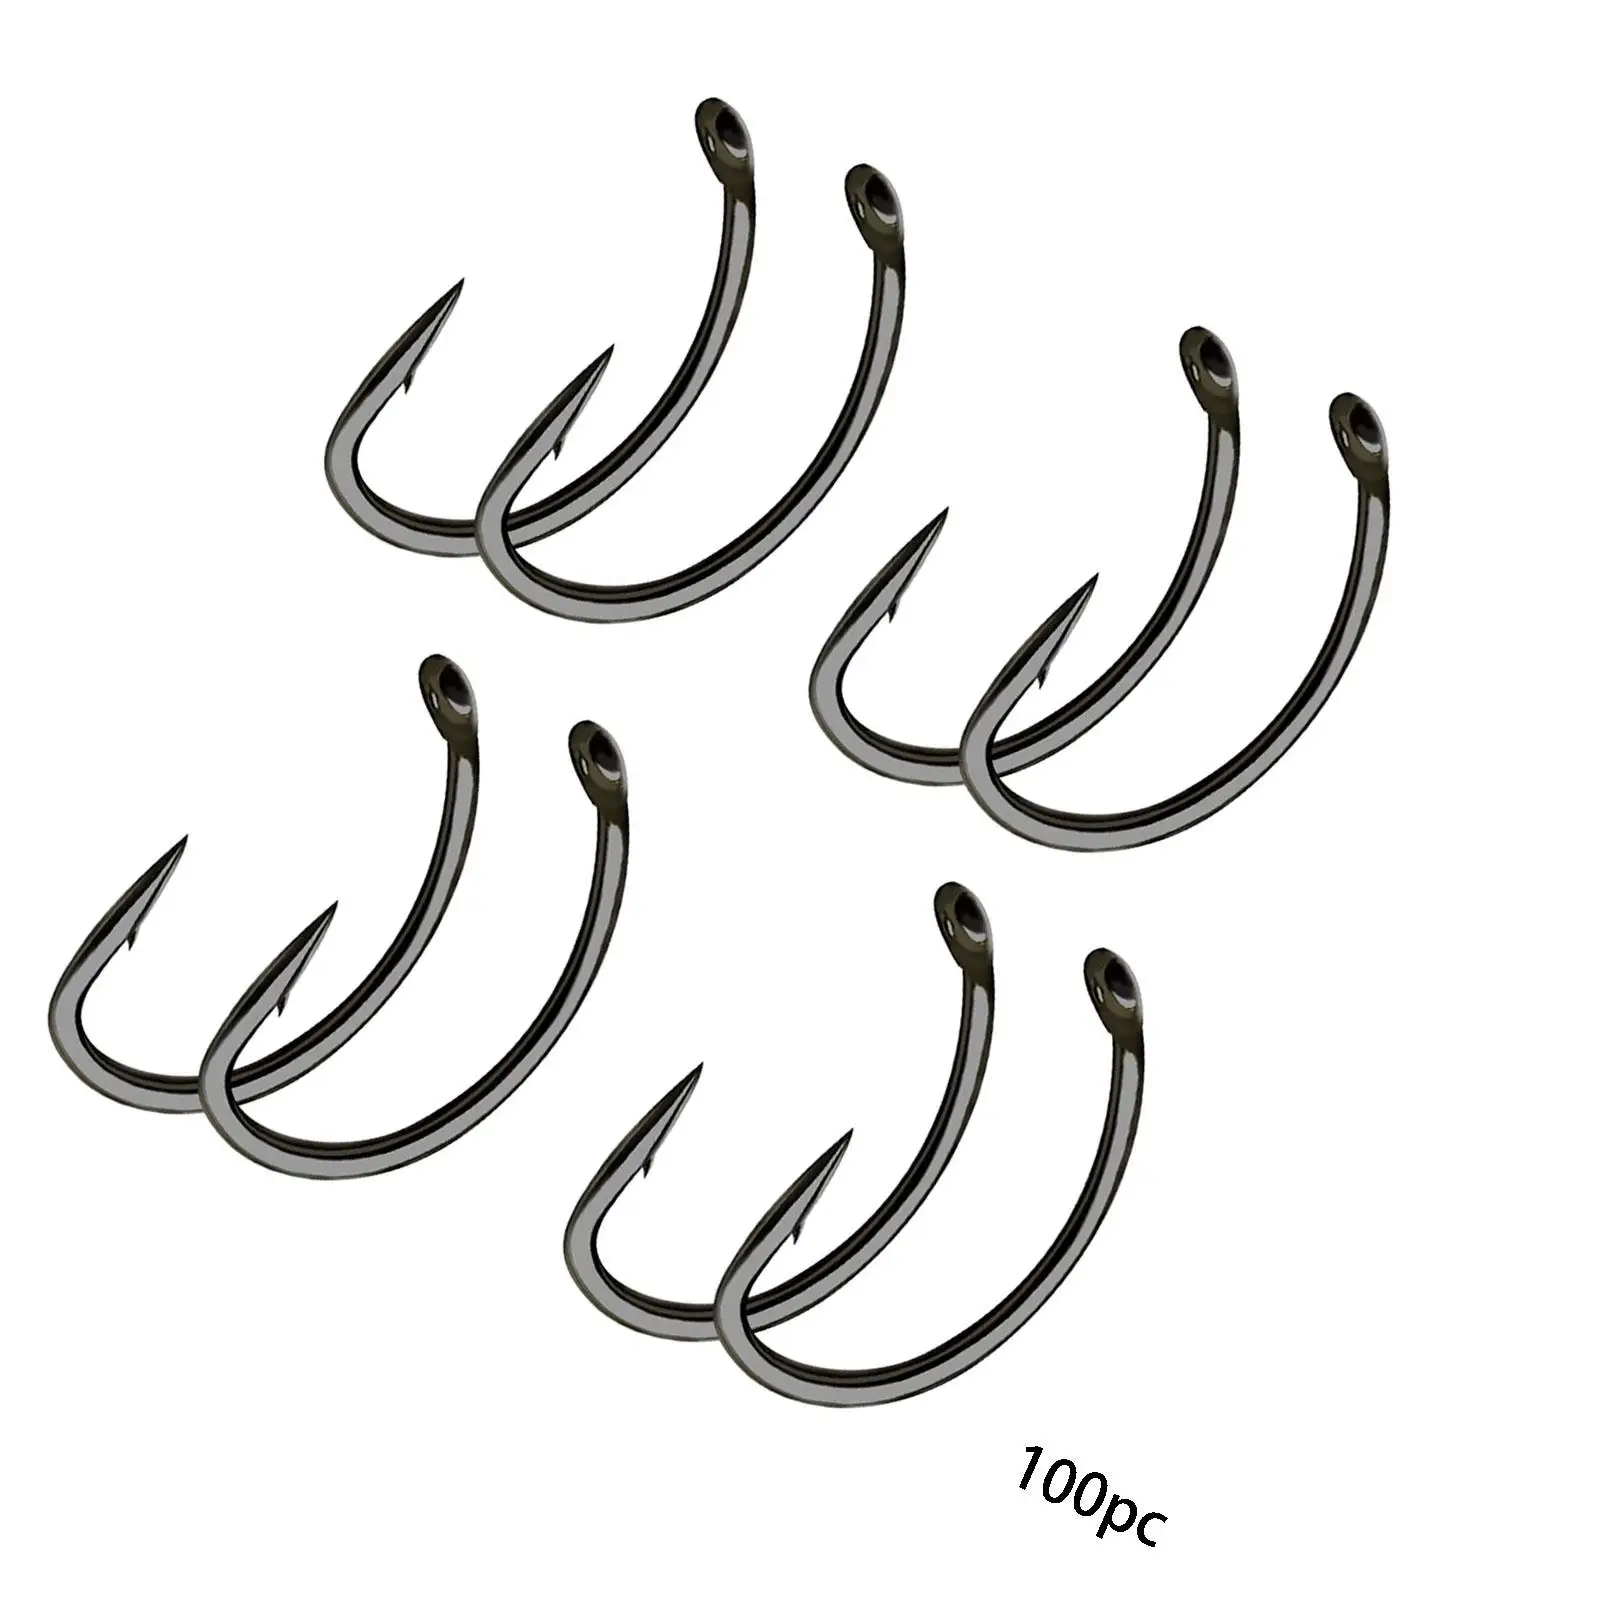 100Pcs Barb Curved Fly Fishing Hooks Gear for Fishing Lures Fly Tying Hooks